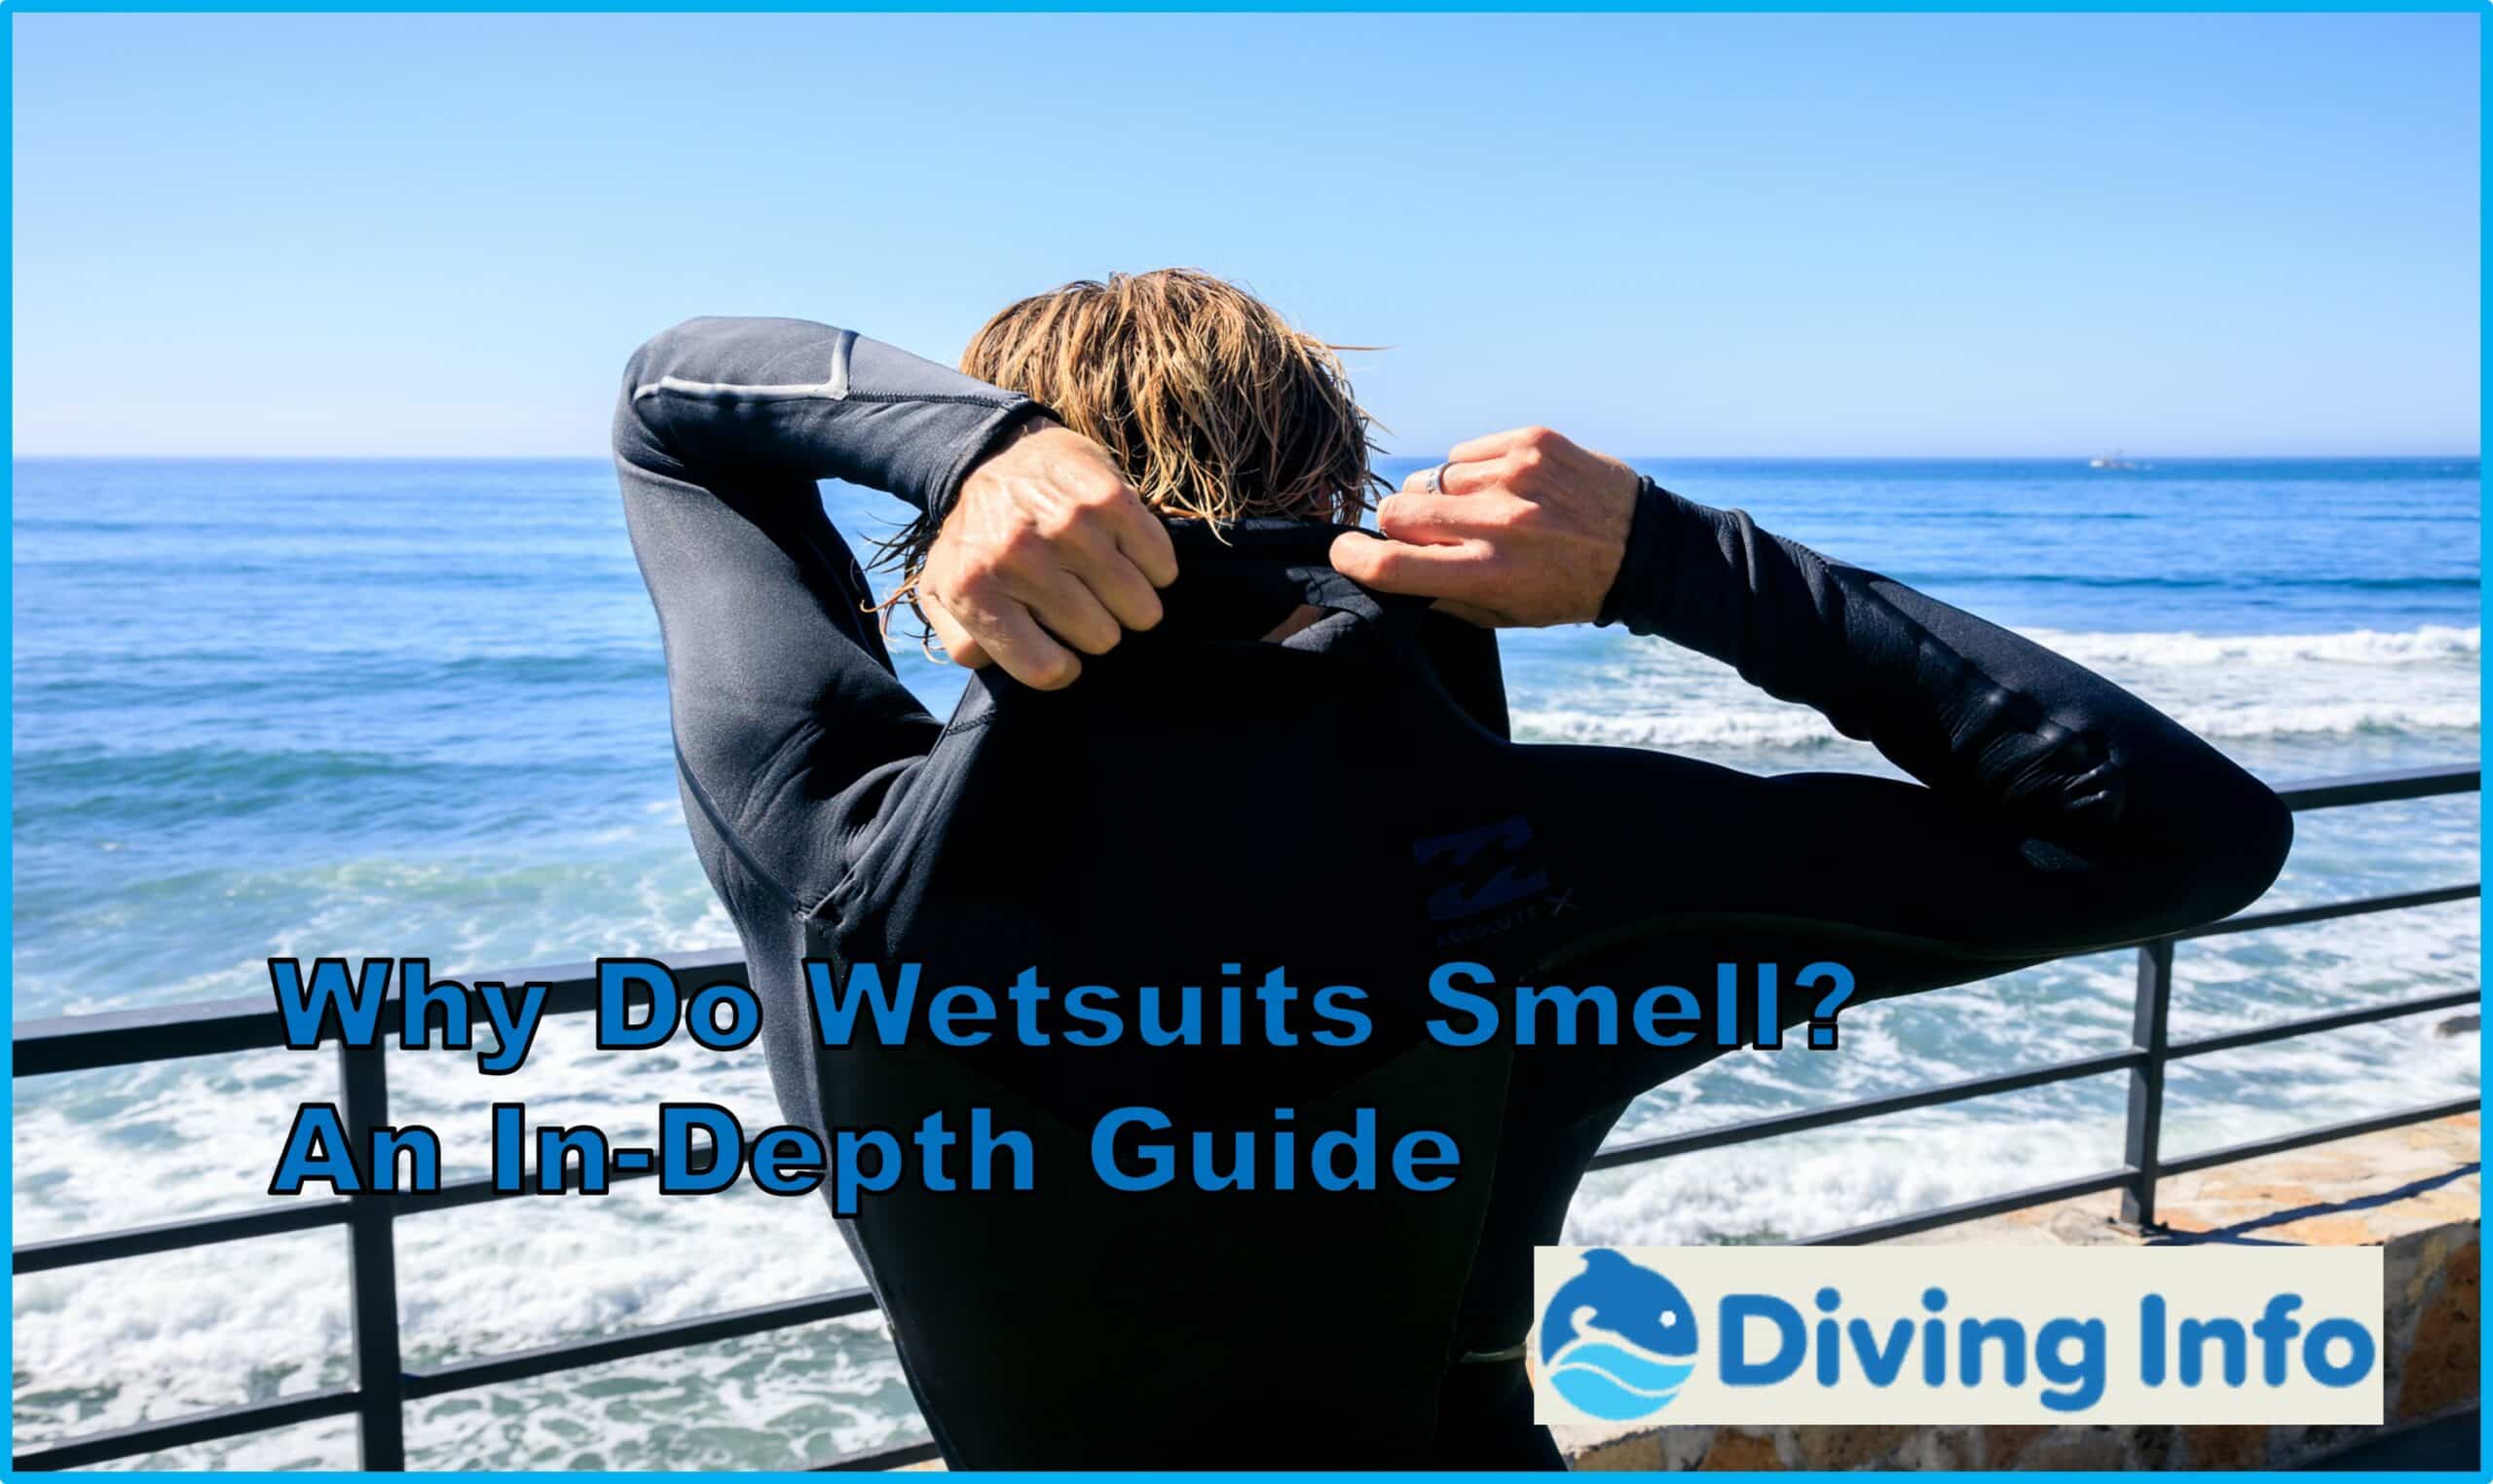 Why Do Wetsuits Smell? An In-Depth Guide